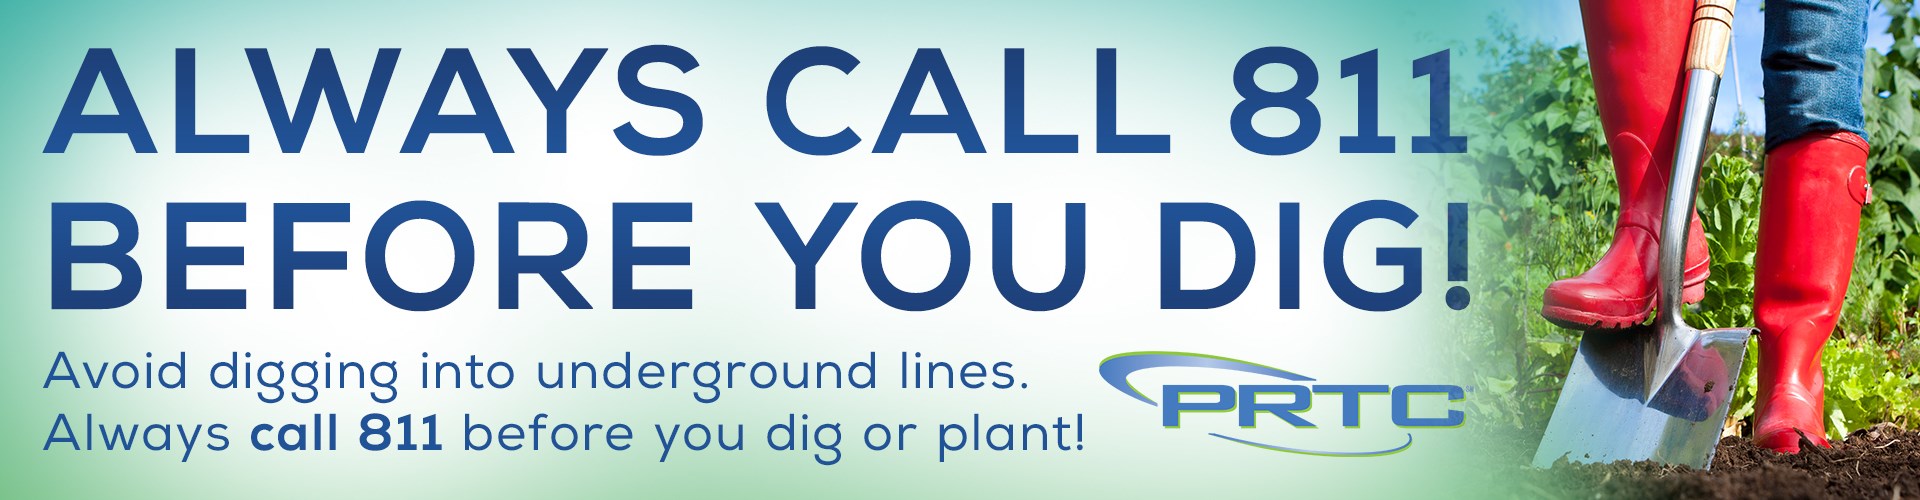 Always Call 811 Before You Dig